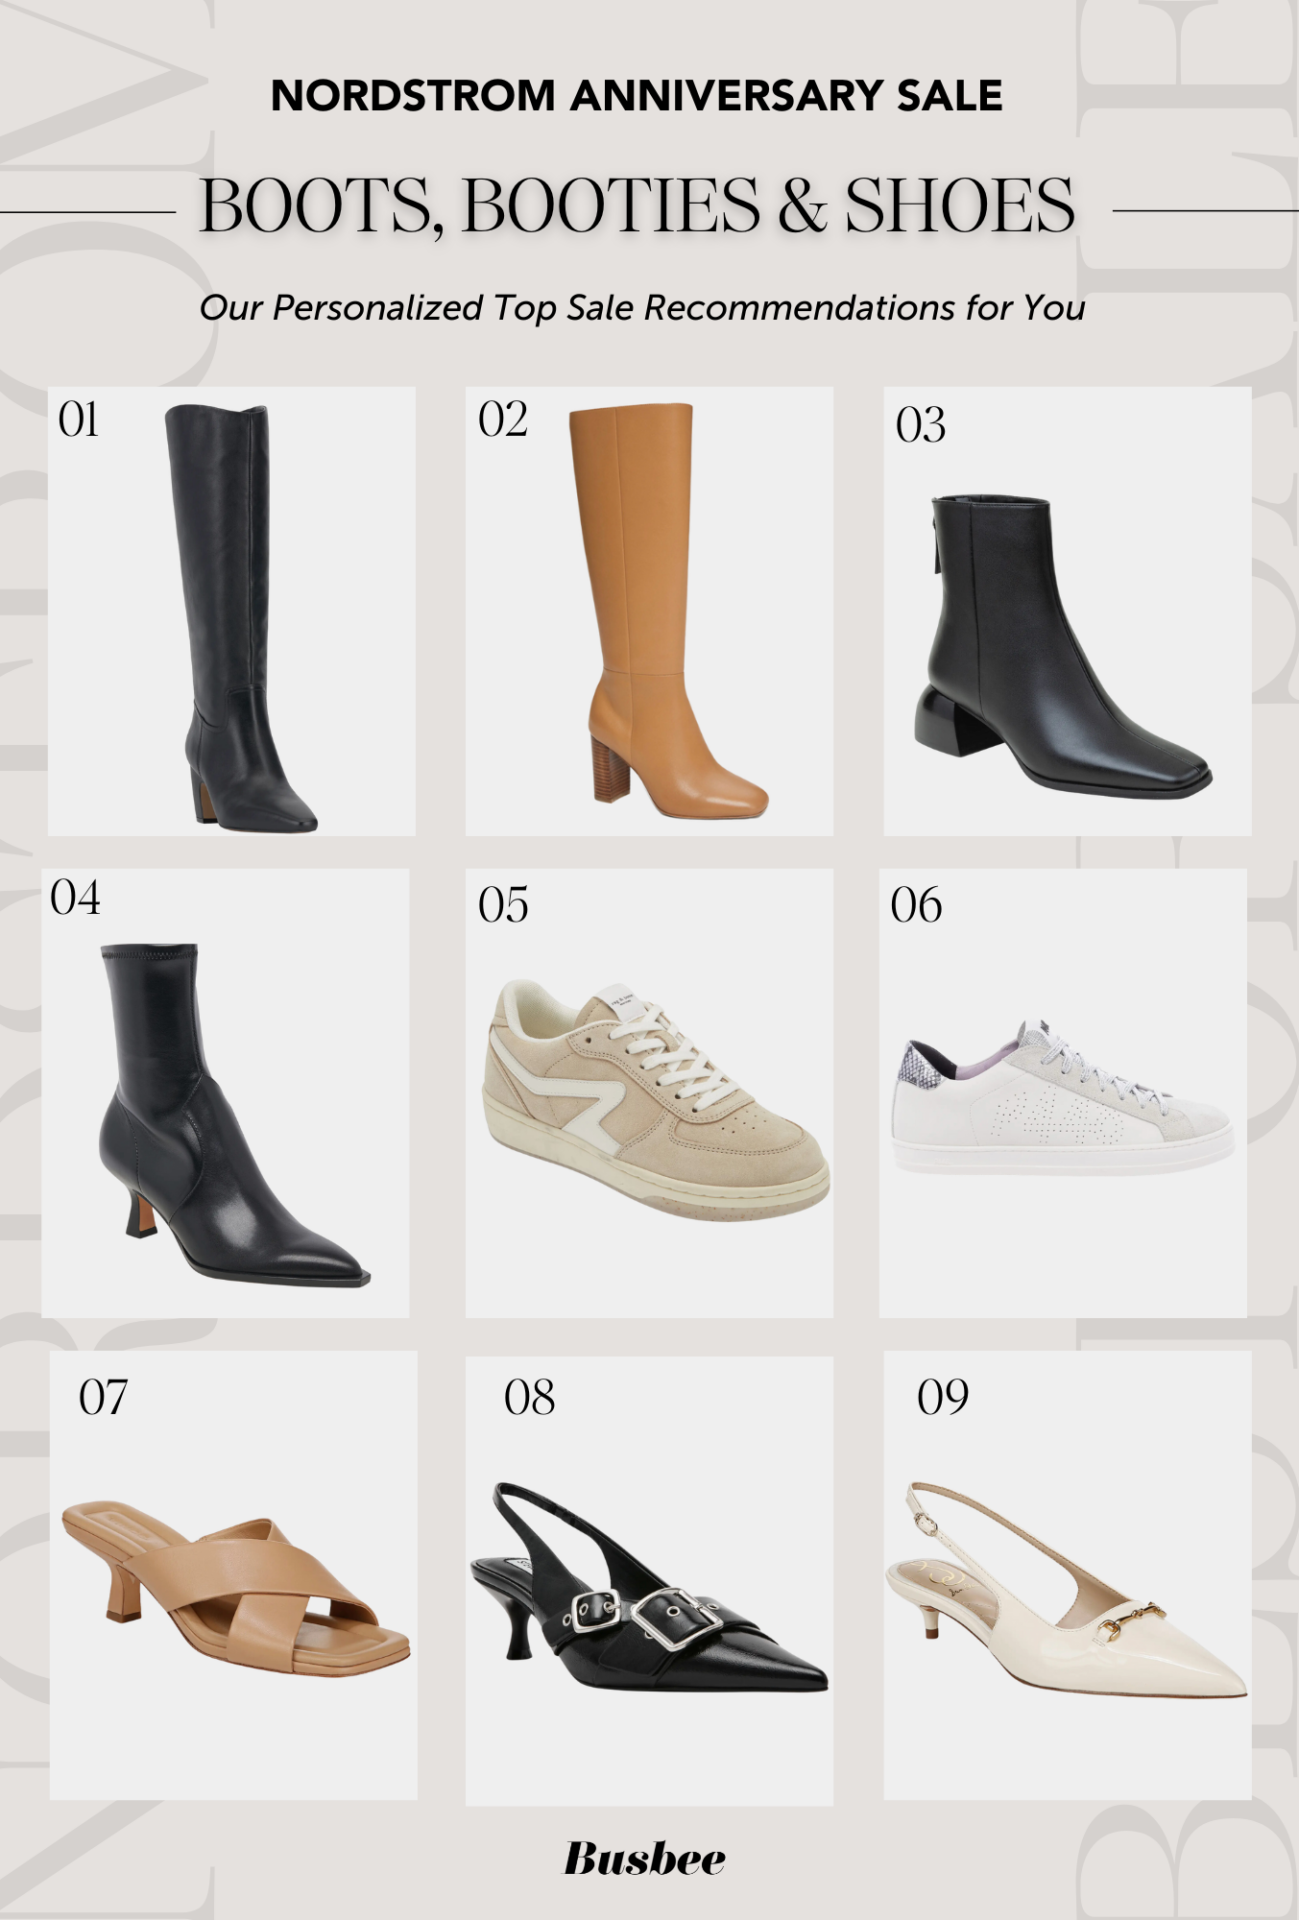 Nordstrom Sale Boots, Booties & Shoes